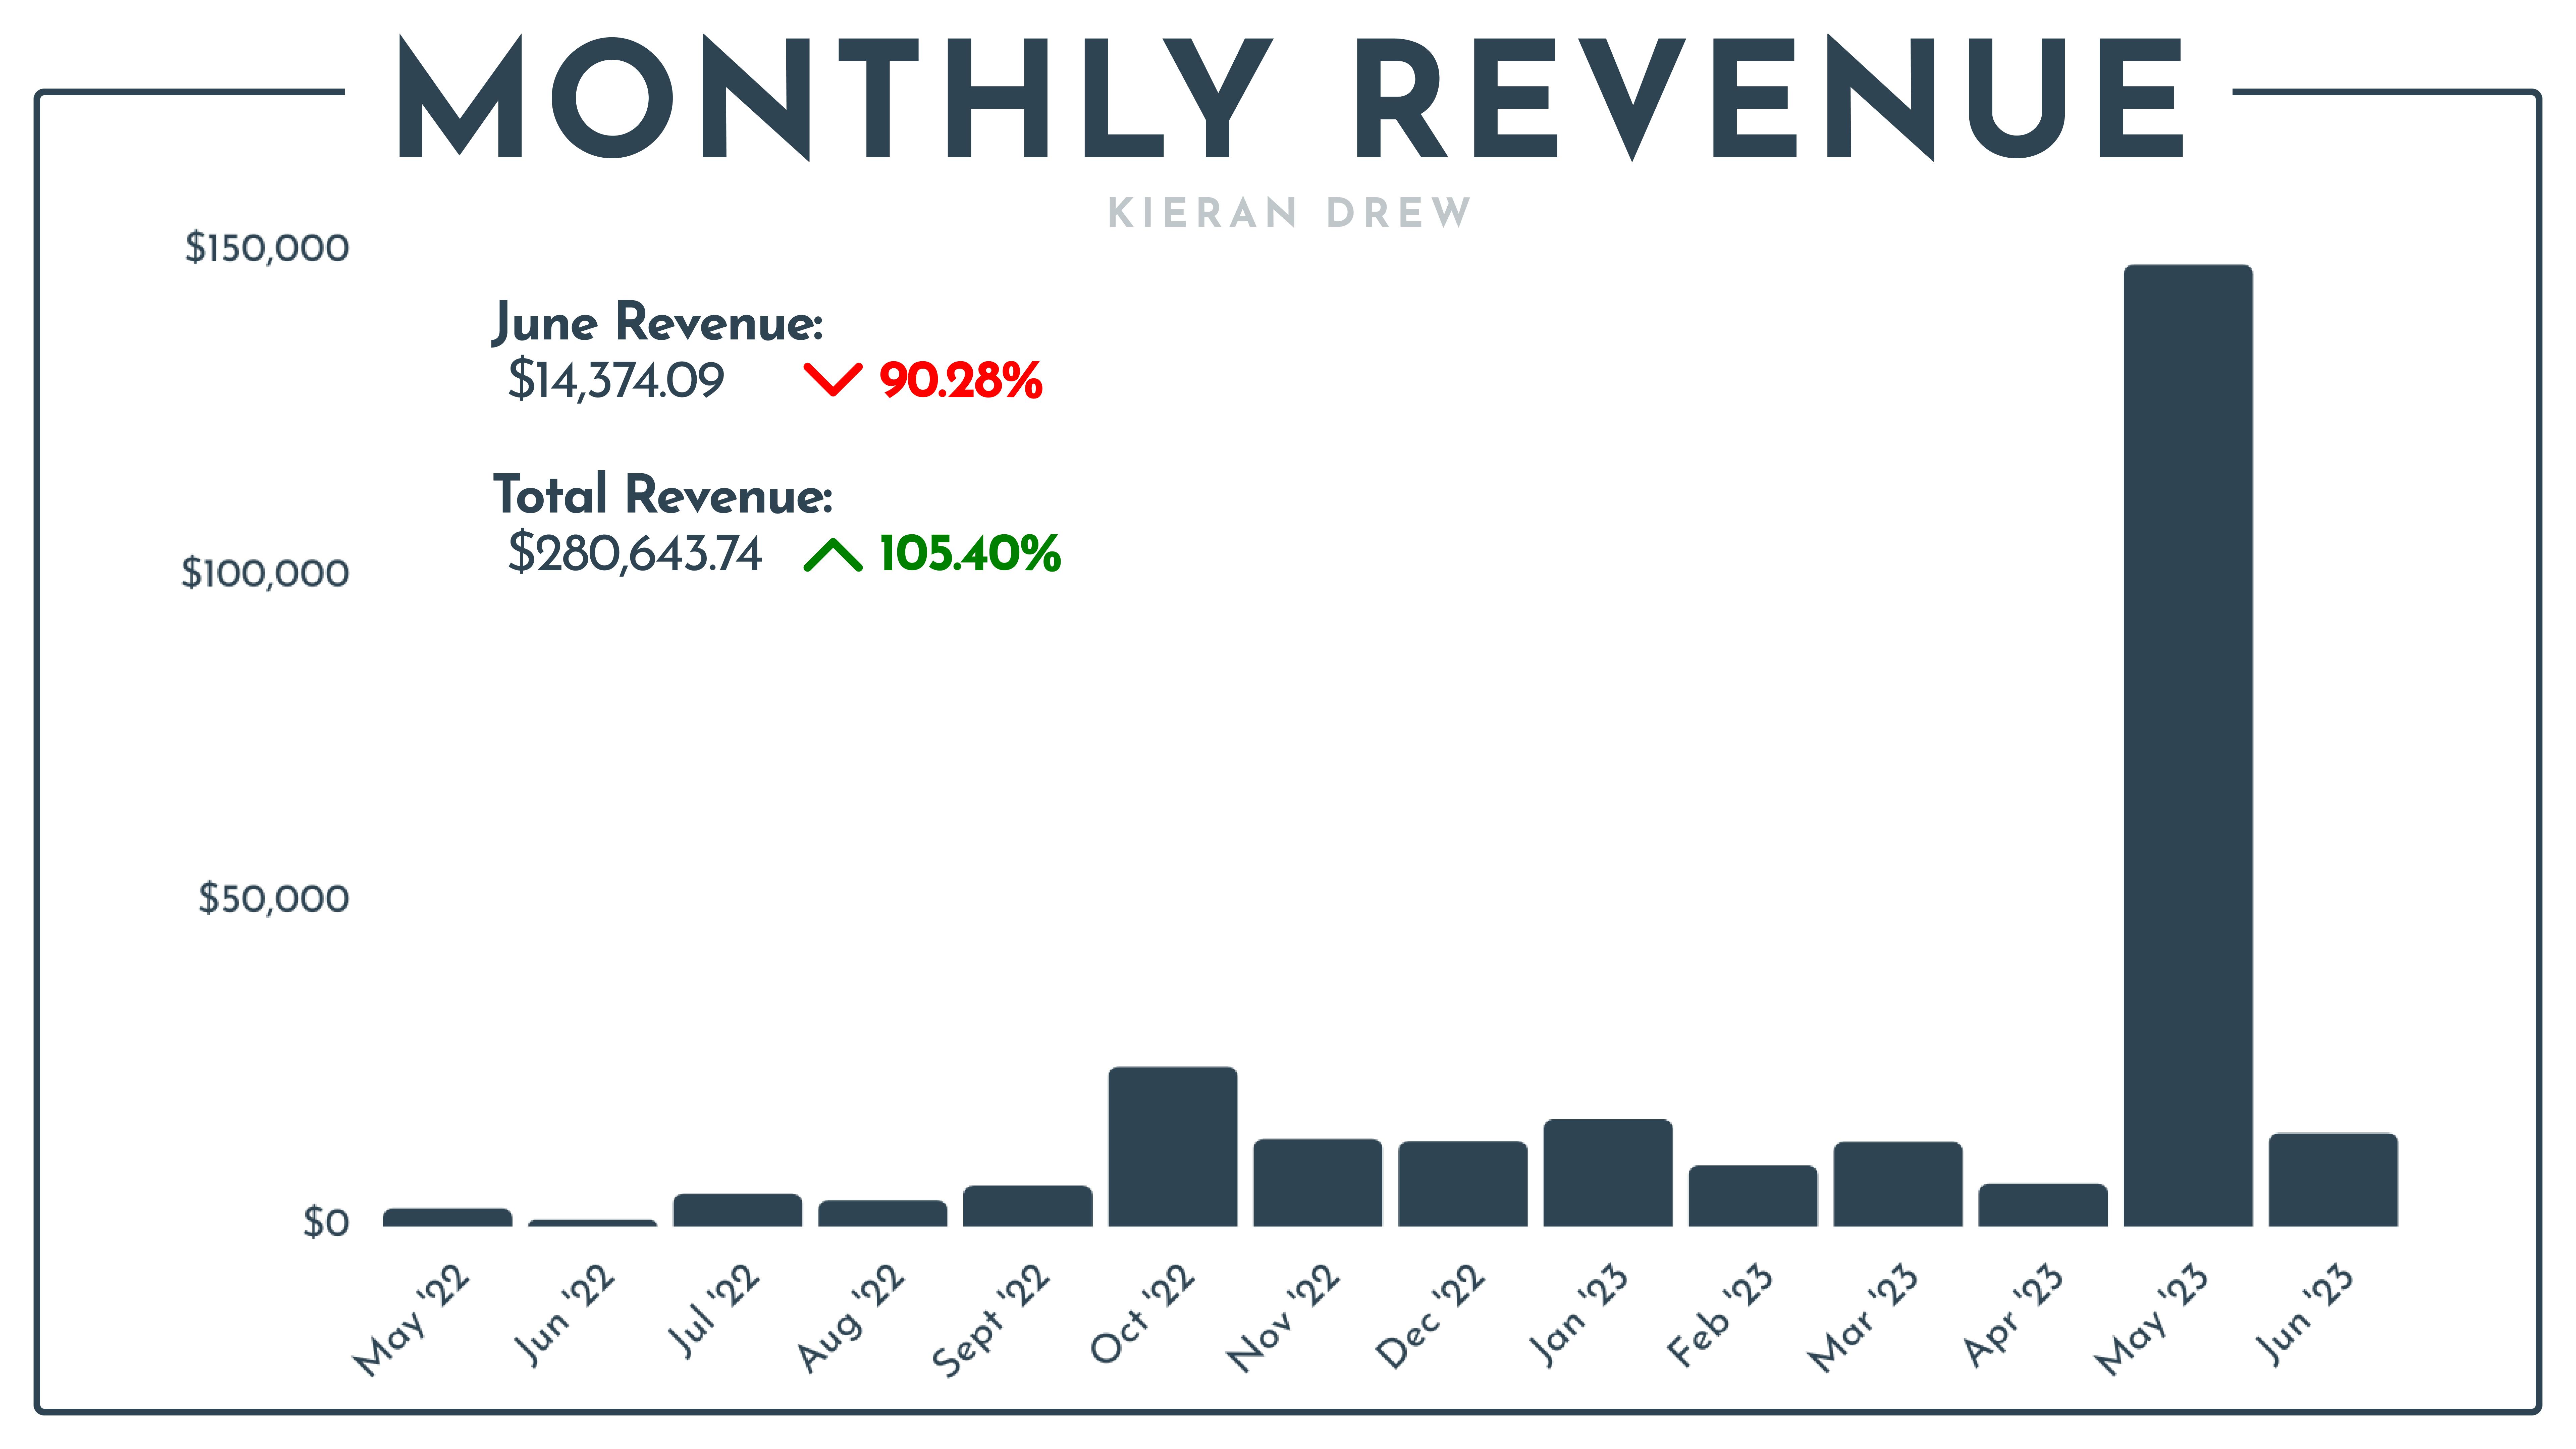 MONTHLY REVENUE BAR CHART